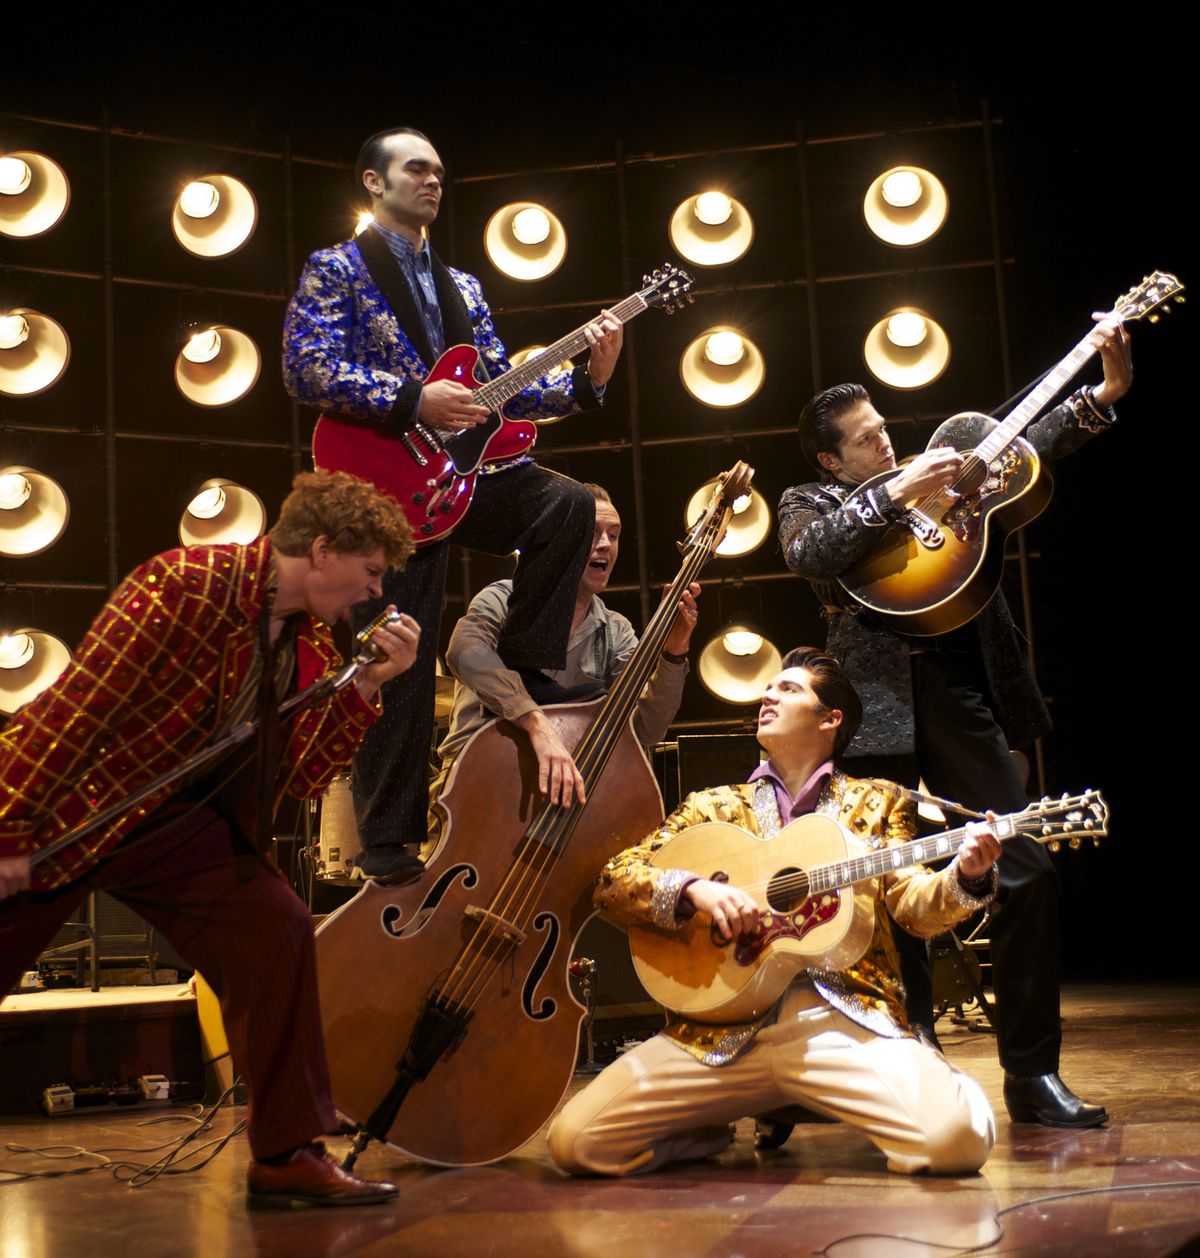 Best of Broadway’s “Million Dollar Quartet” captures four celebrated careers at very different stages. (Photo by Paul Natkin)